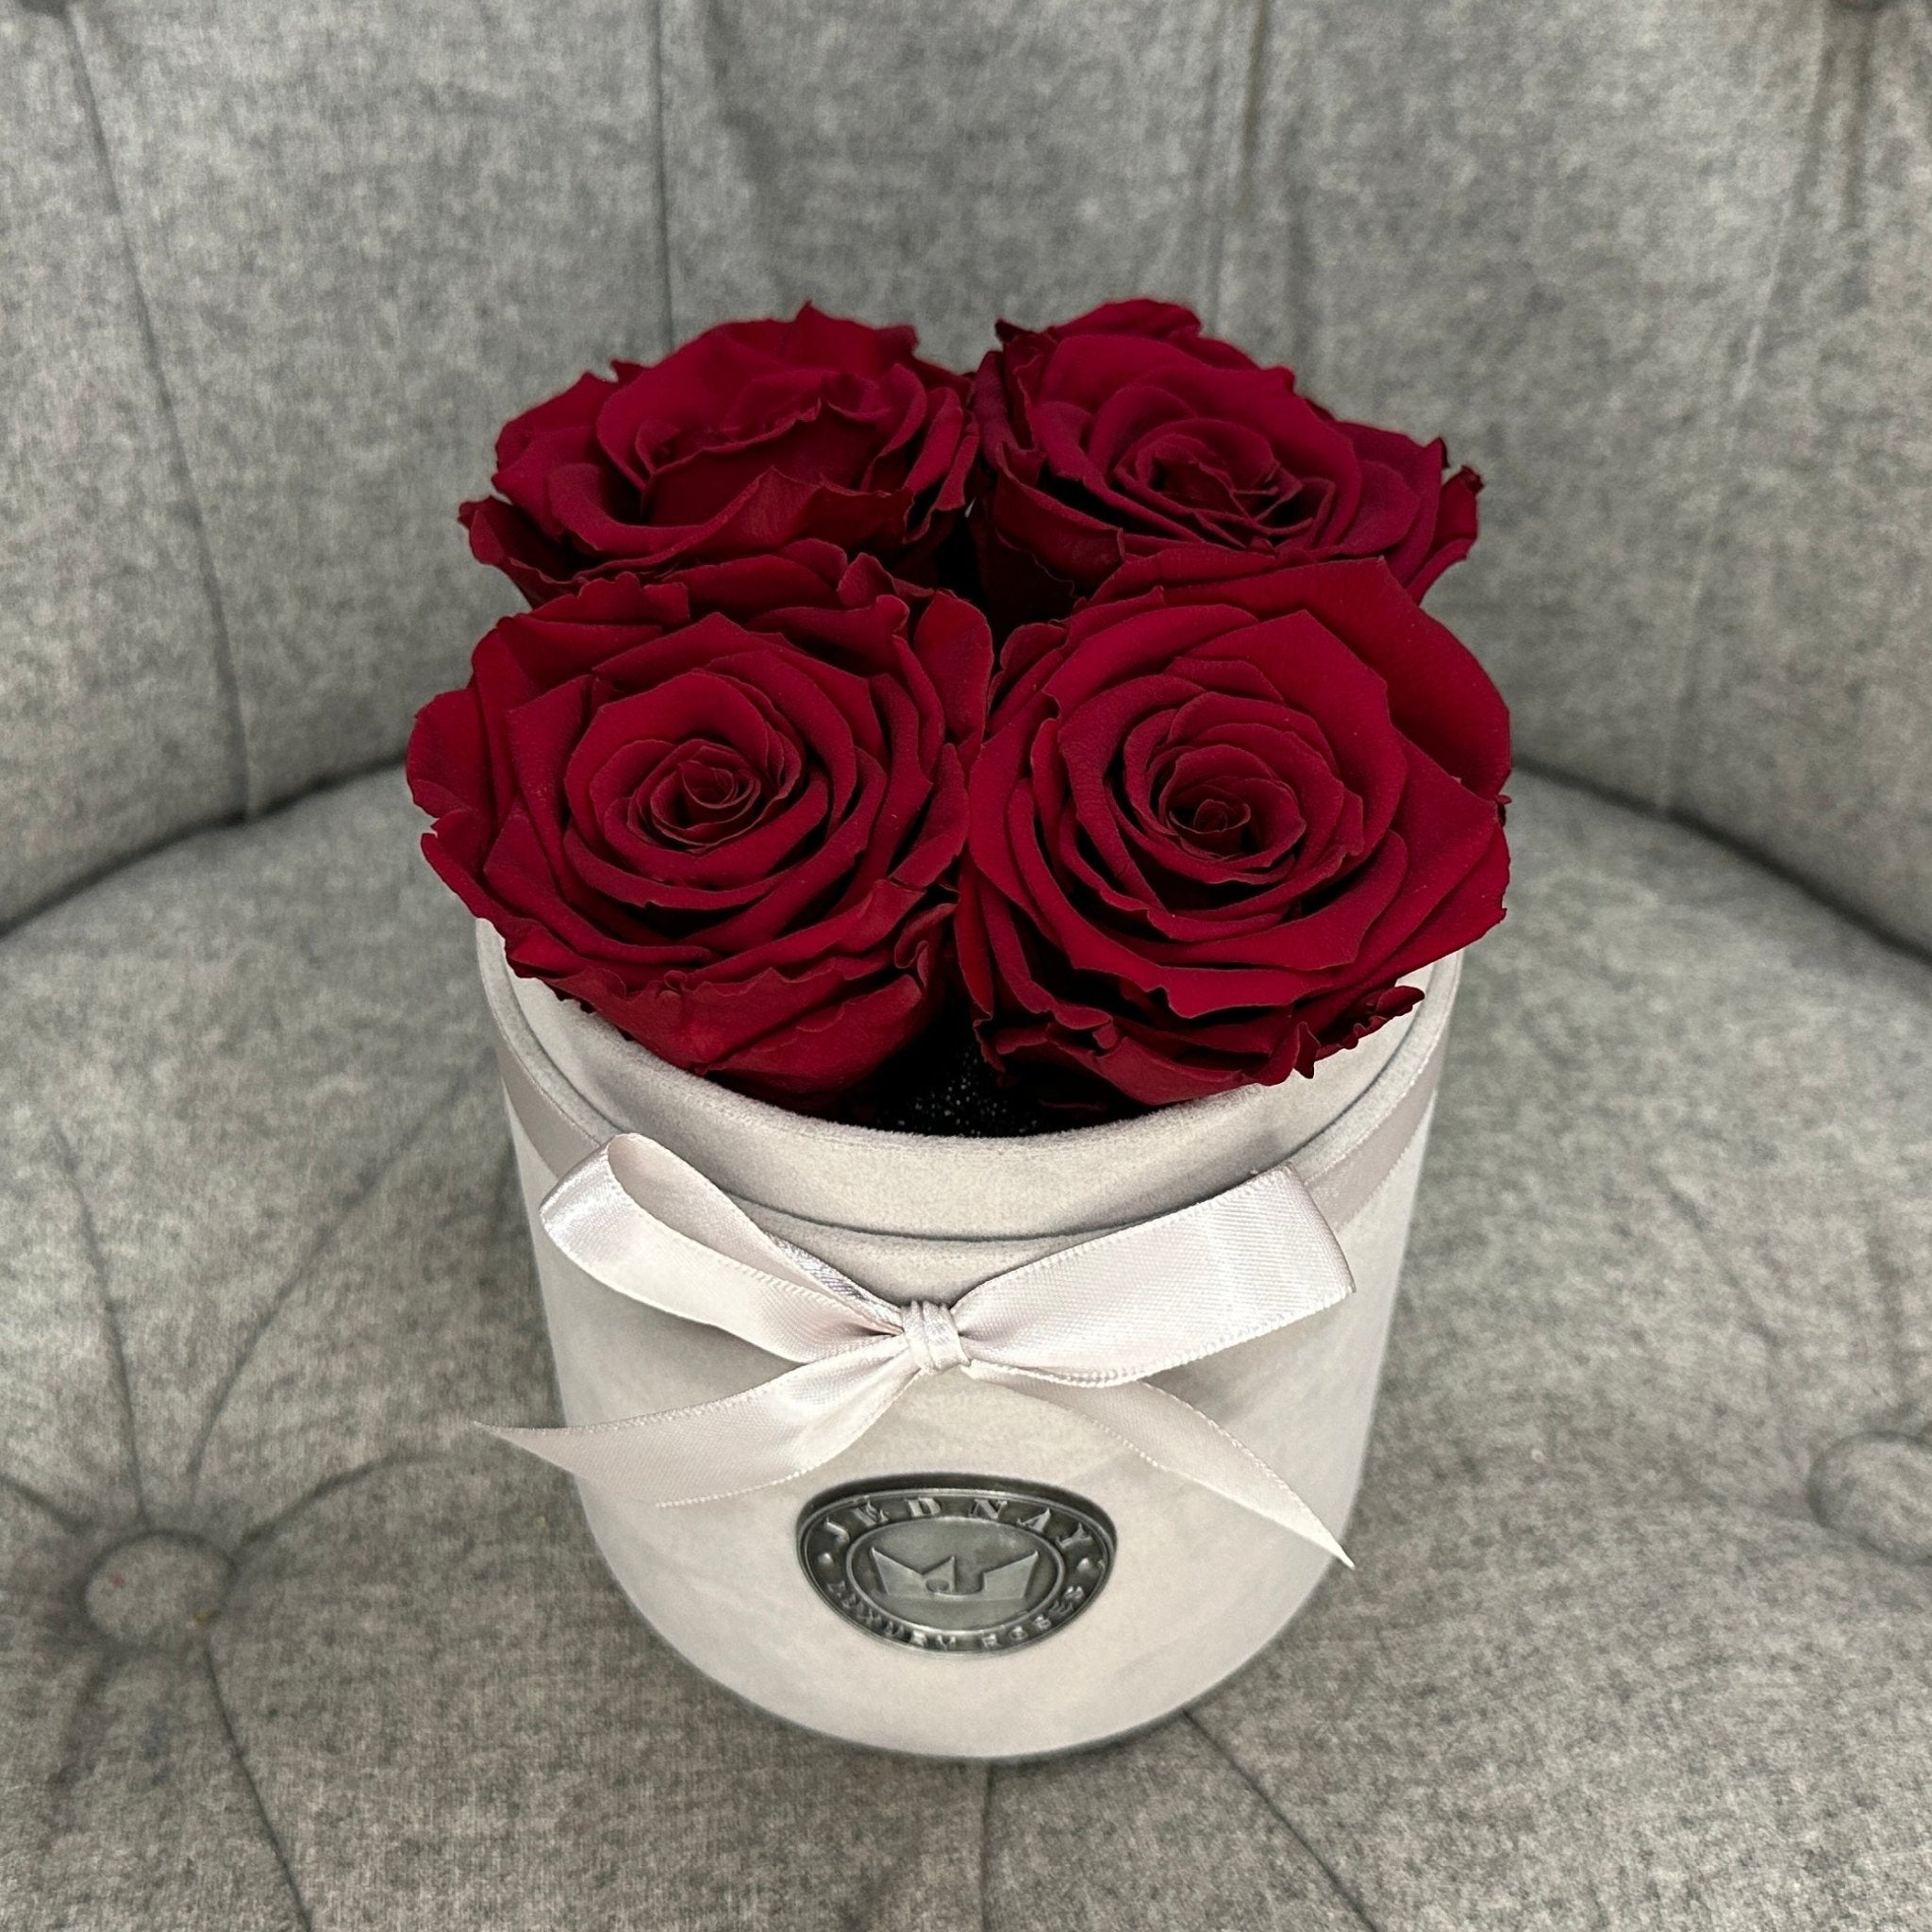 Petite Grey Suede Forever Rose Box - Red Red Wine Eternal Roses - Jednay Roses